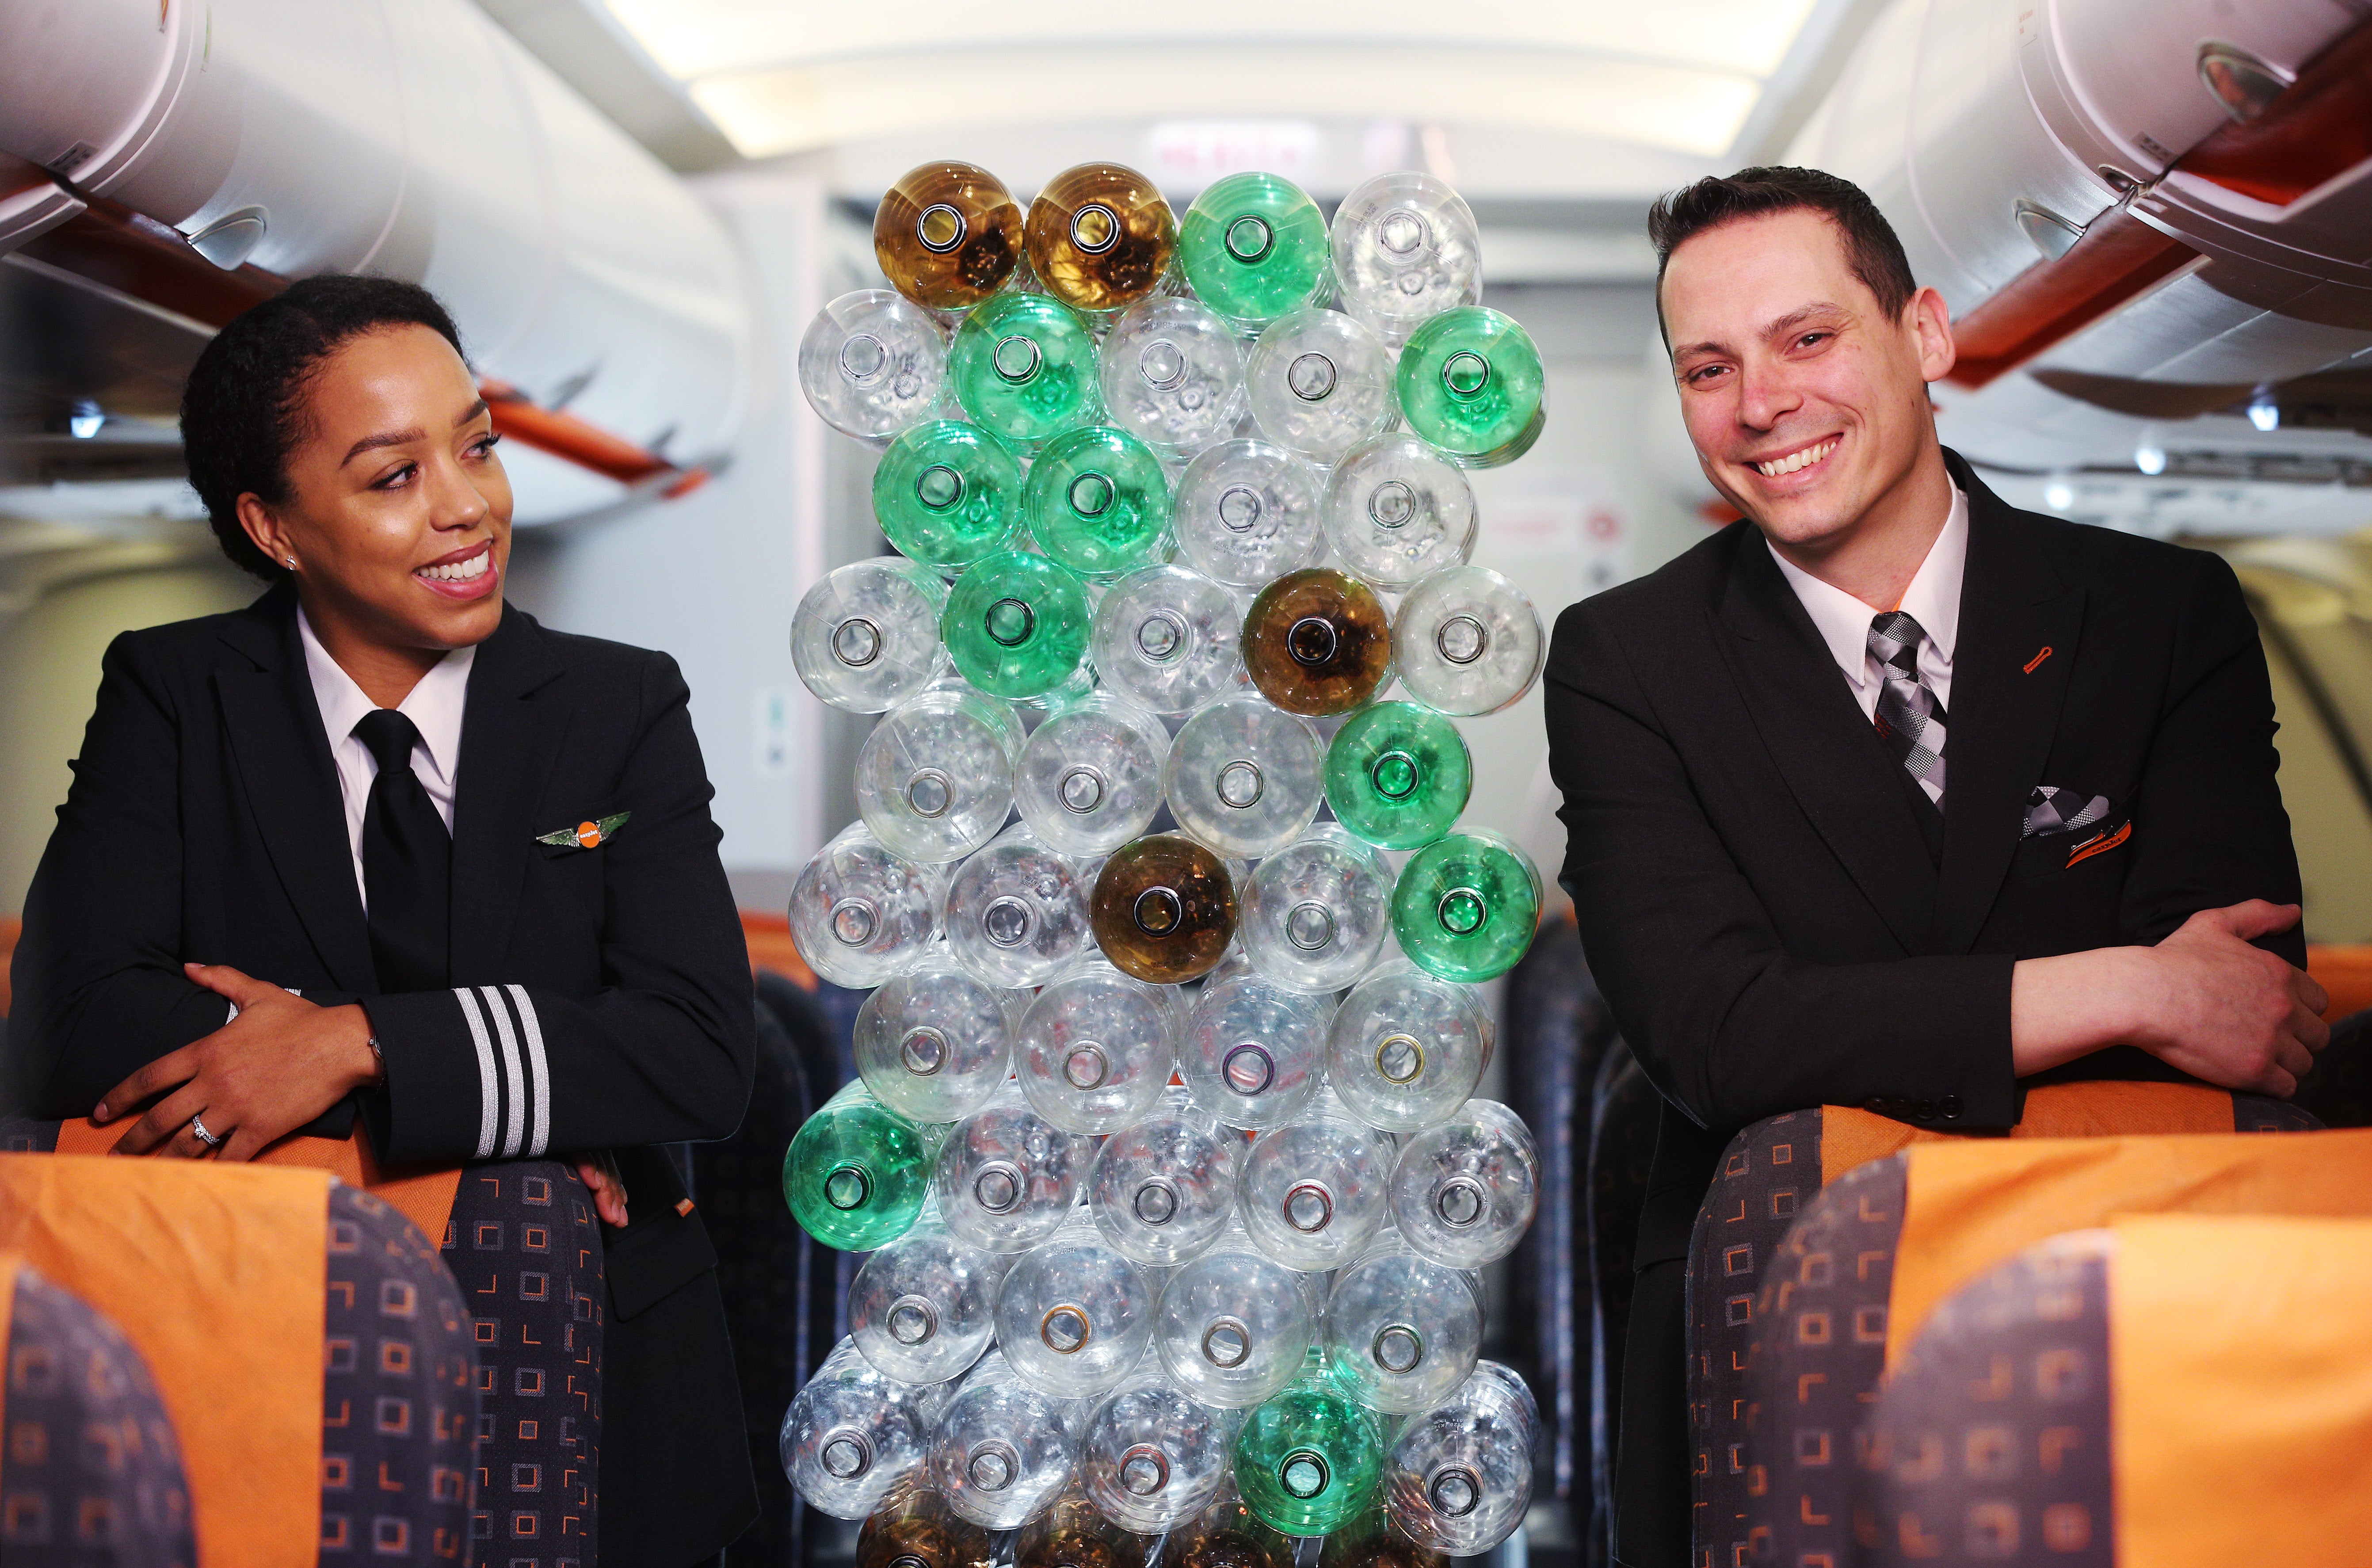 EasyJet has announced its new uniforms will be made with recycled plastic bottles